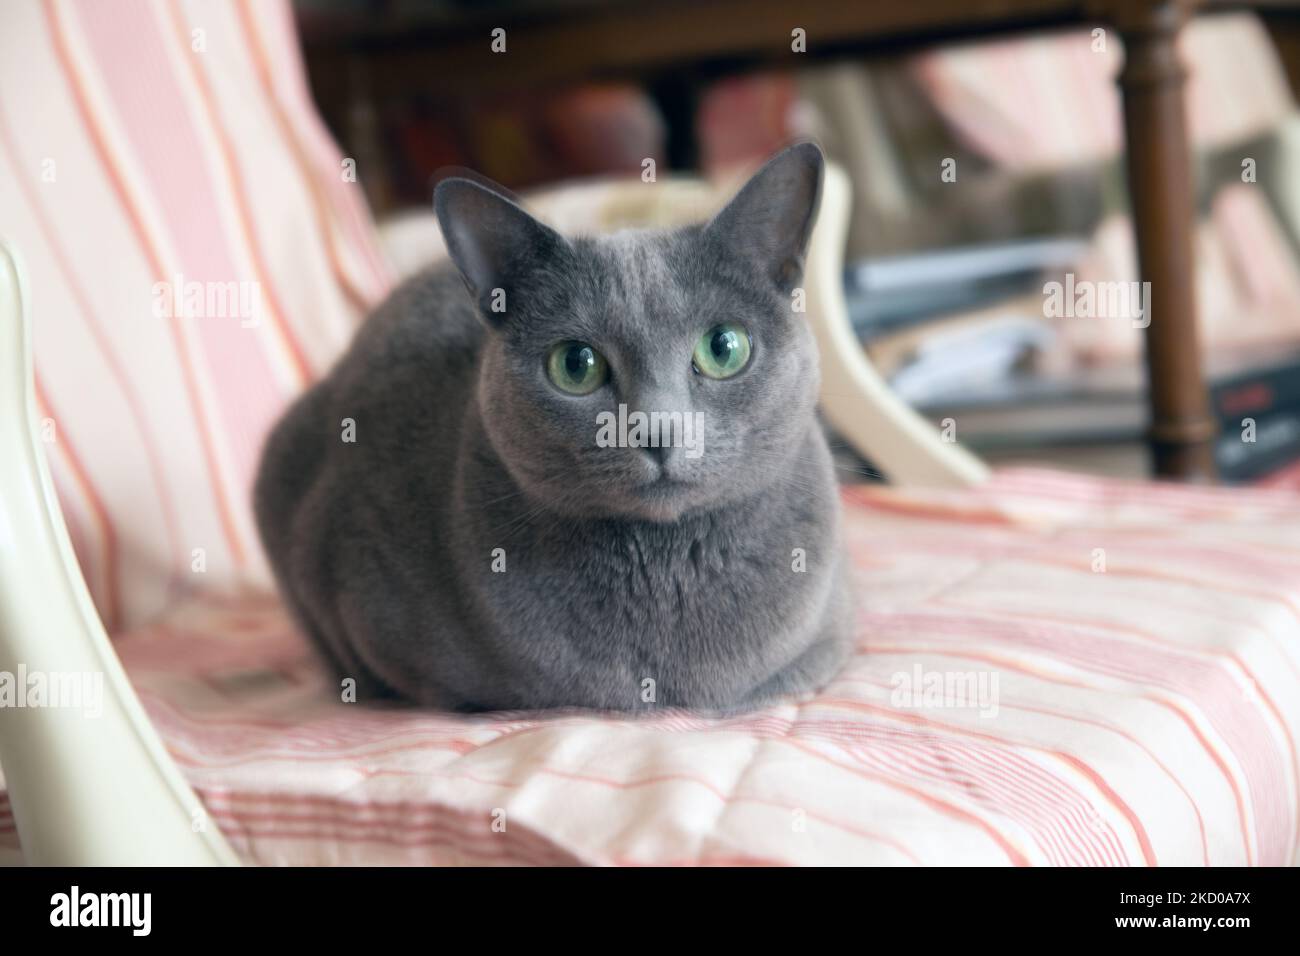 Russian Blue cat on a chair Stock Photo